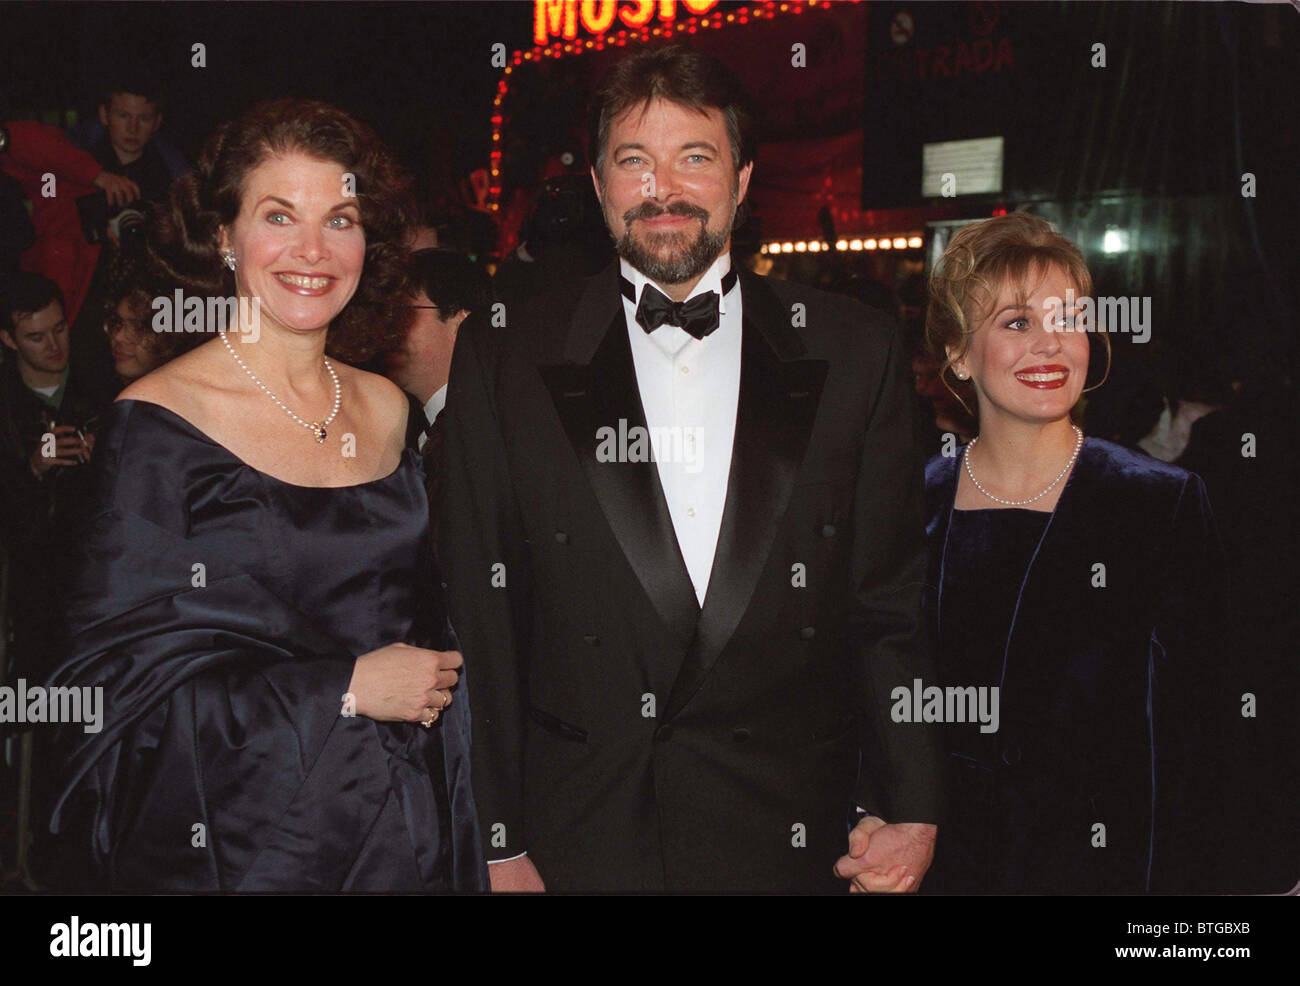 JONATHAN FRAKES (COMMANDER WILLIAM RIKER) SHERRY LANSING & PARAMOUNT'S CHAIRMAN AT FILM PREMIERE OF STAR TREK FIRST CONTACT Stock Photo